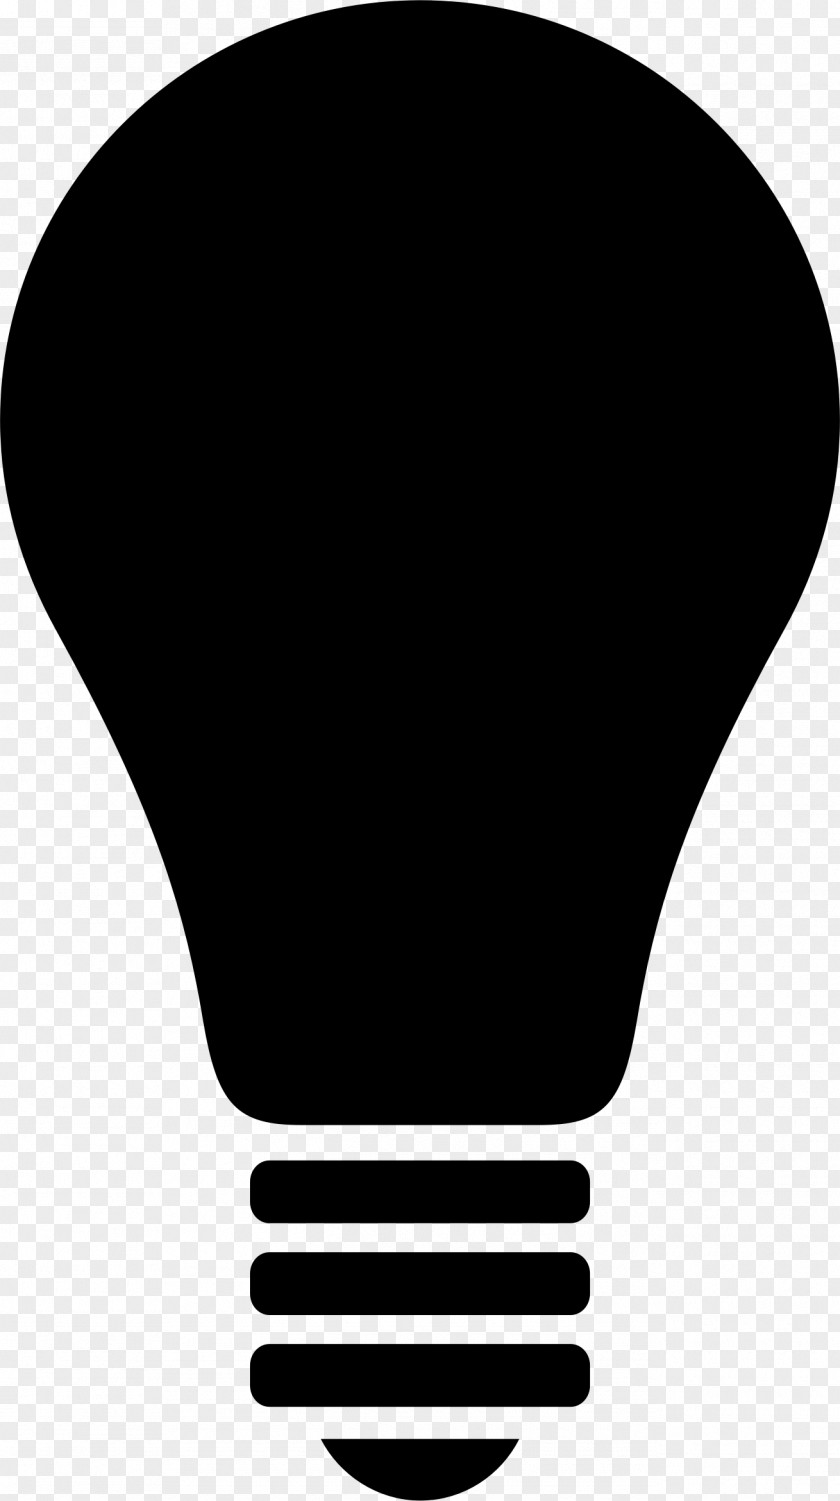 People Icon Incandescent Light Bulb Lamp Christmas Lights Clip Art PNG